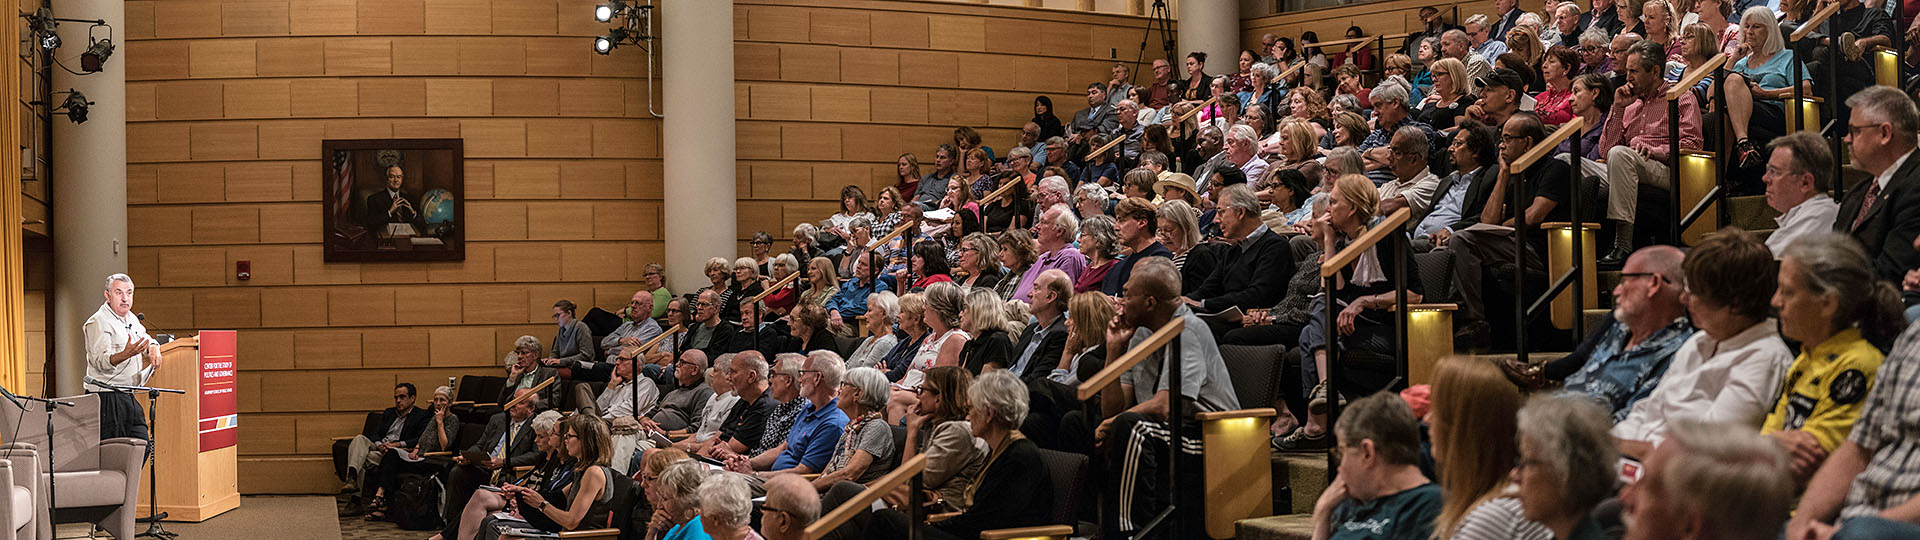 Wide shot of a large audience in the Humphrey School's auditorium